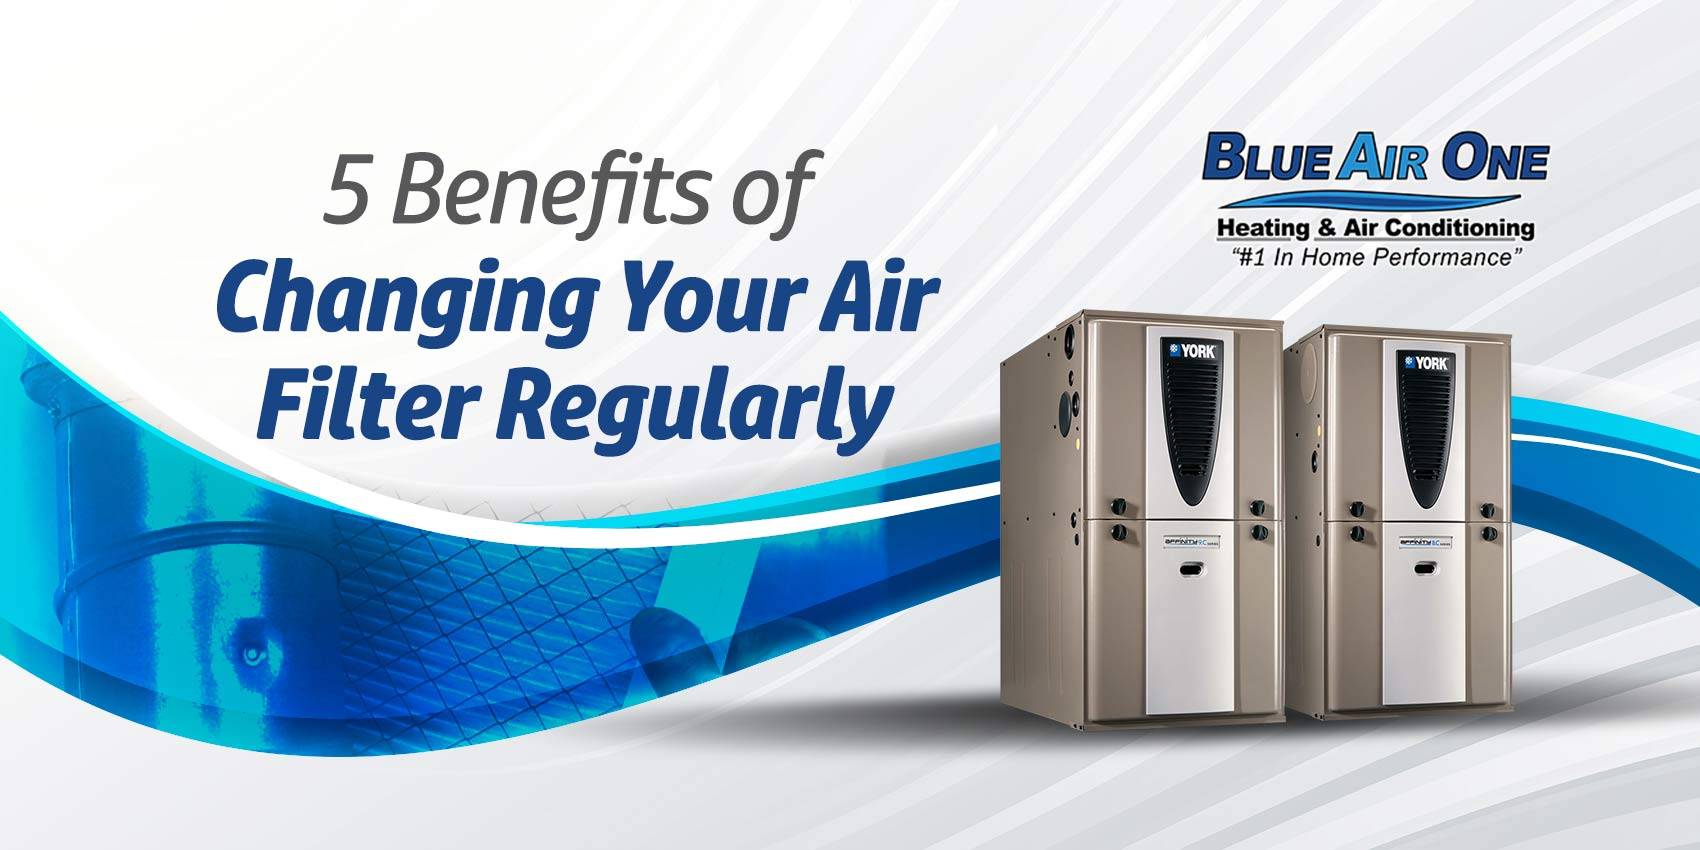 5 Benefits of Changing Your Air Filter Regularly